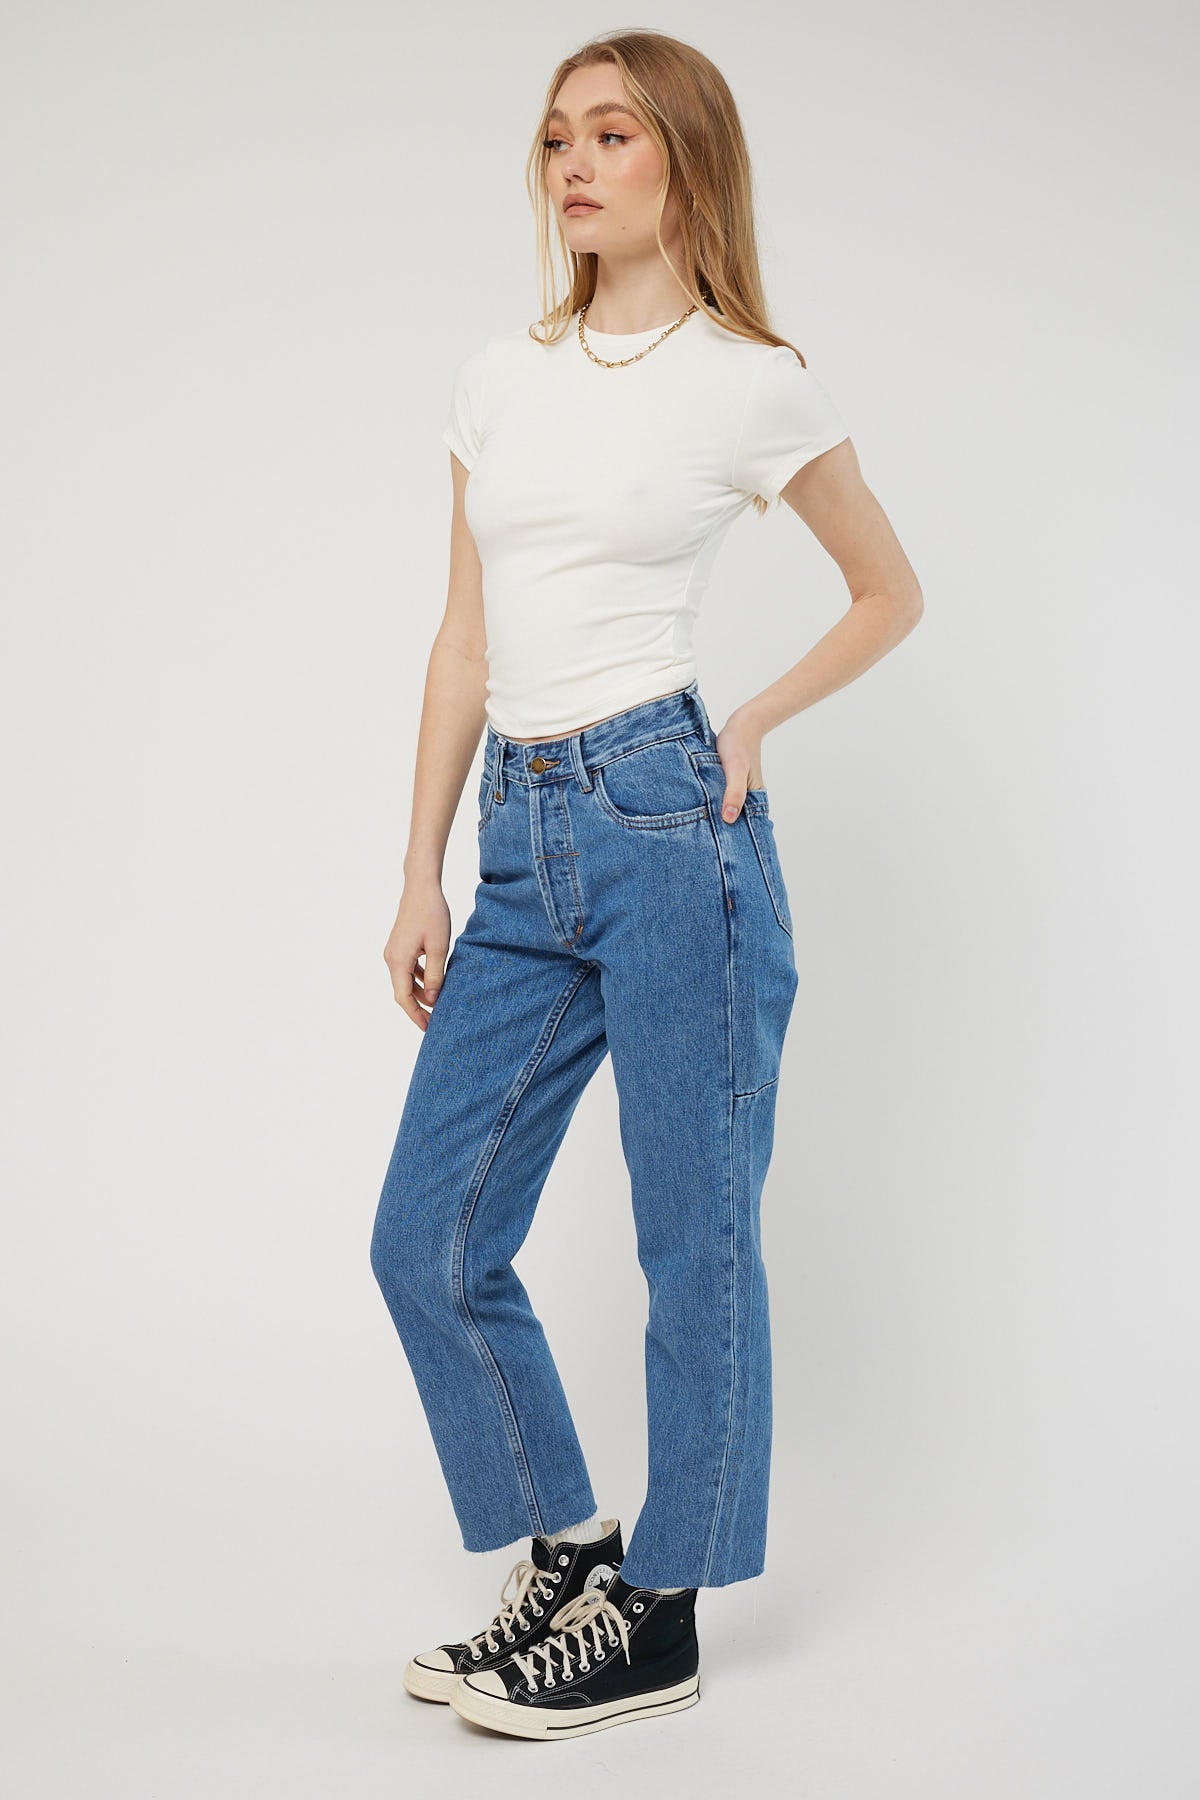 Thrills Paige Mid Rise Jean Highway Blue